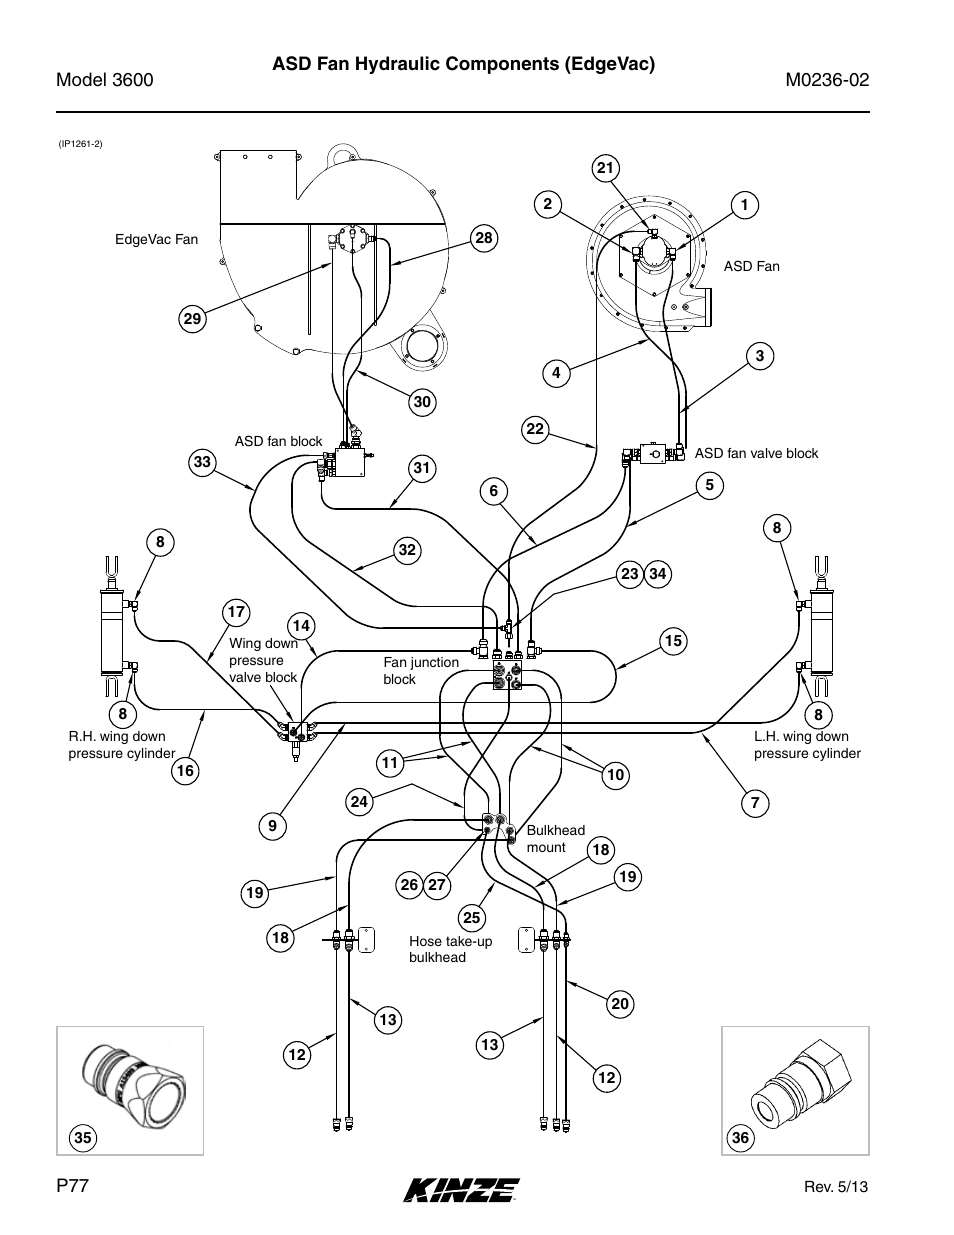 Asd fan hydraulic components (edgevac) | Kinze 3600 Lift and Rotate Planter Rev. 5/14 User Manual | Page 80 / 302